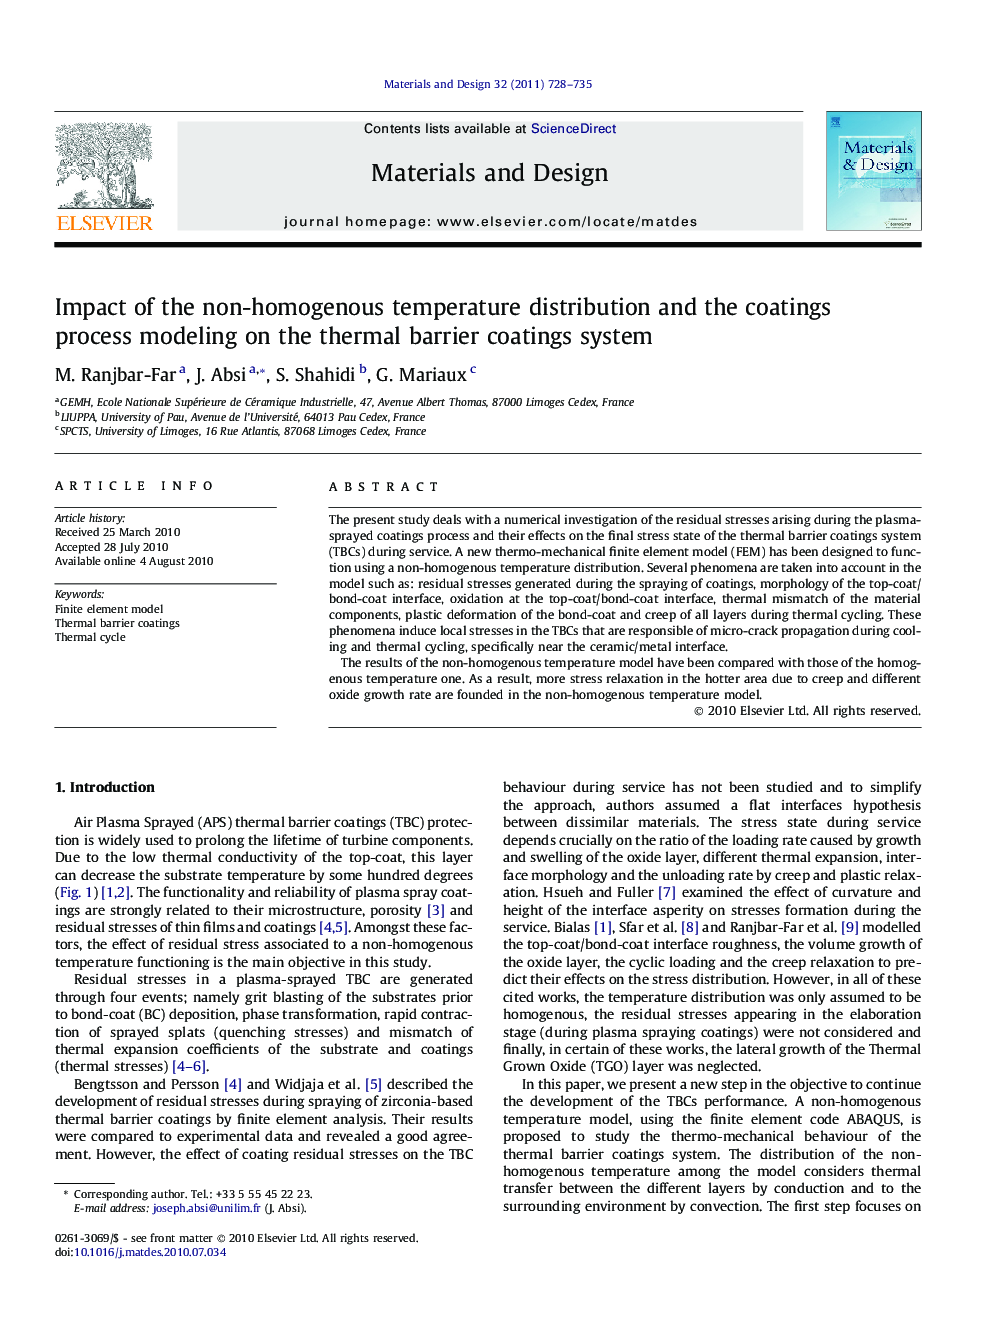 Impact of the non-homogenous temperature distribution and the coatings process modeling on the thermal barrier coatings system